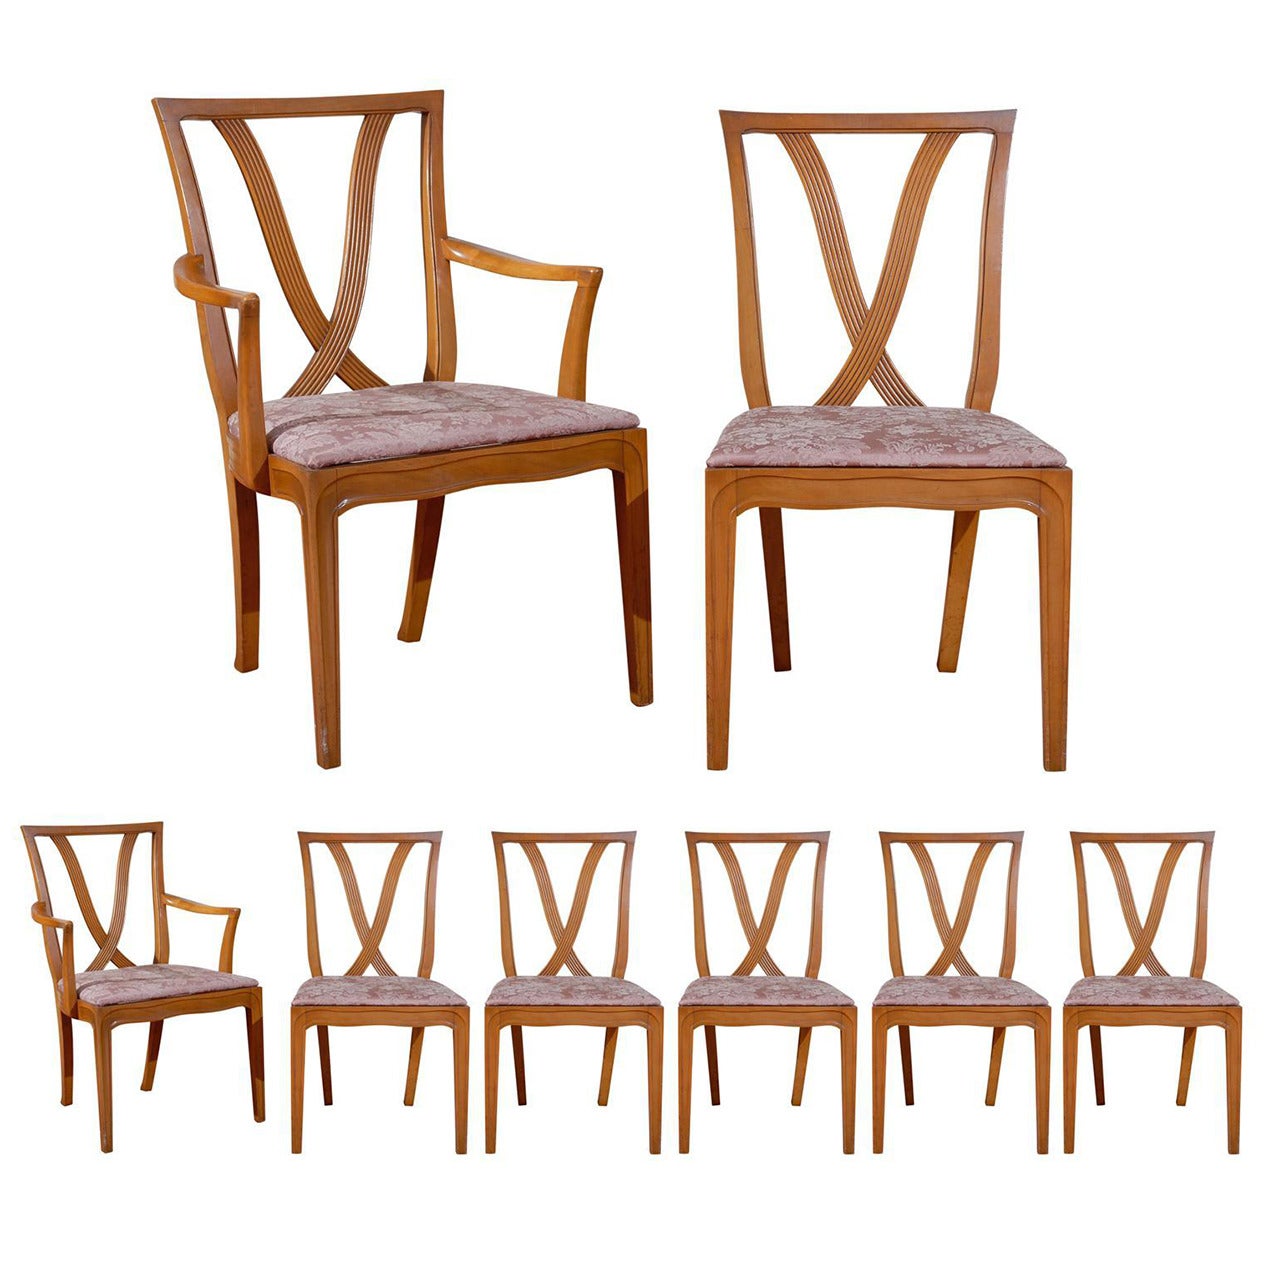 Stunning Set of 8 Dining Chairs by Tomlinson, 1955 - Choice of Lacquer Color 